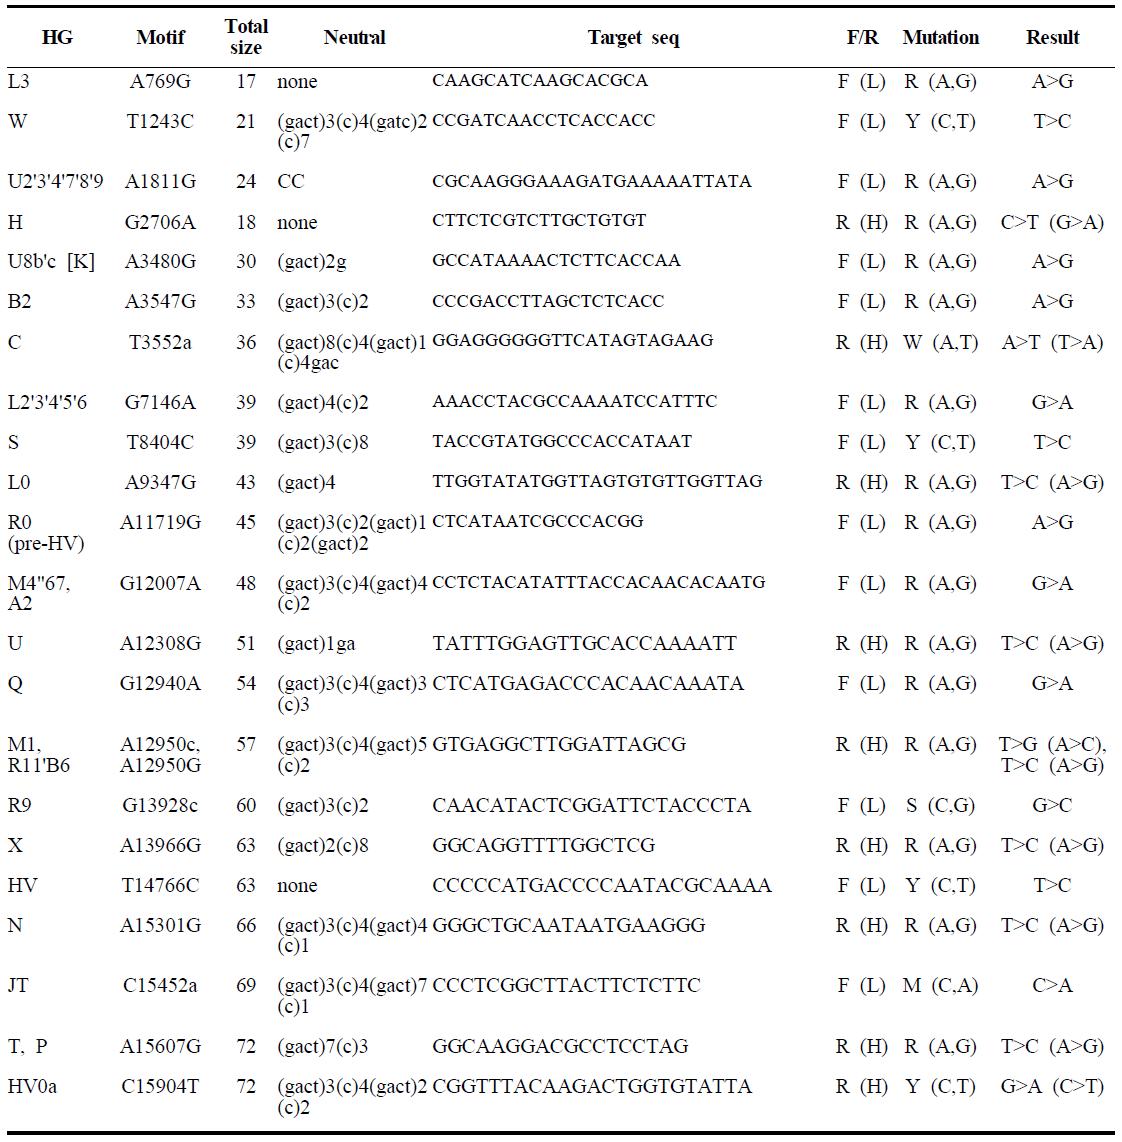 SBE primers for the detection of the 25 mitochondrial DNA variations of multiplex set-2.